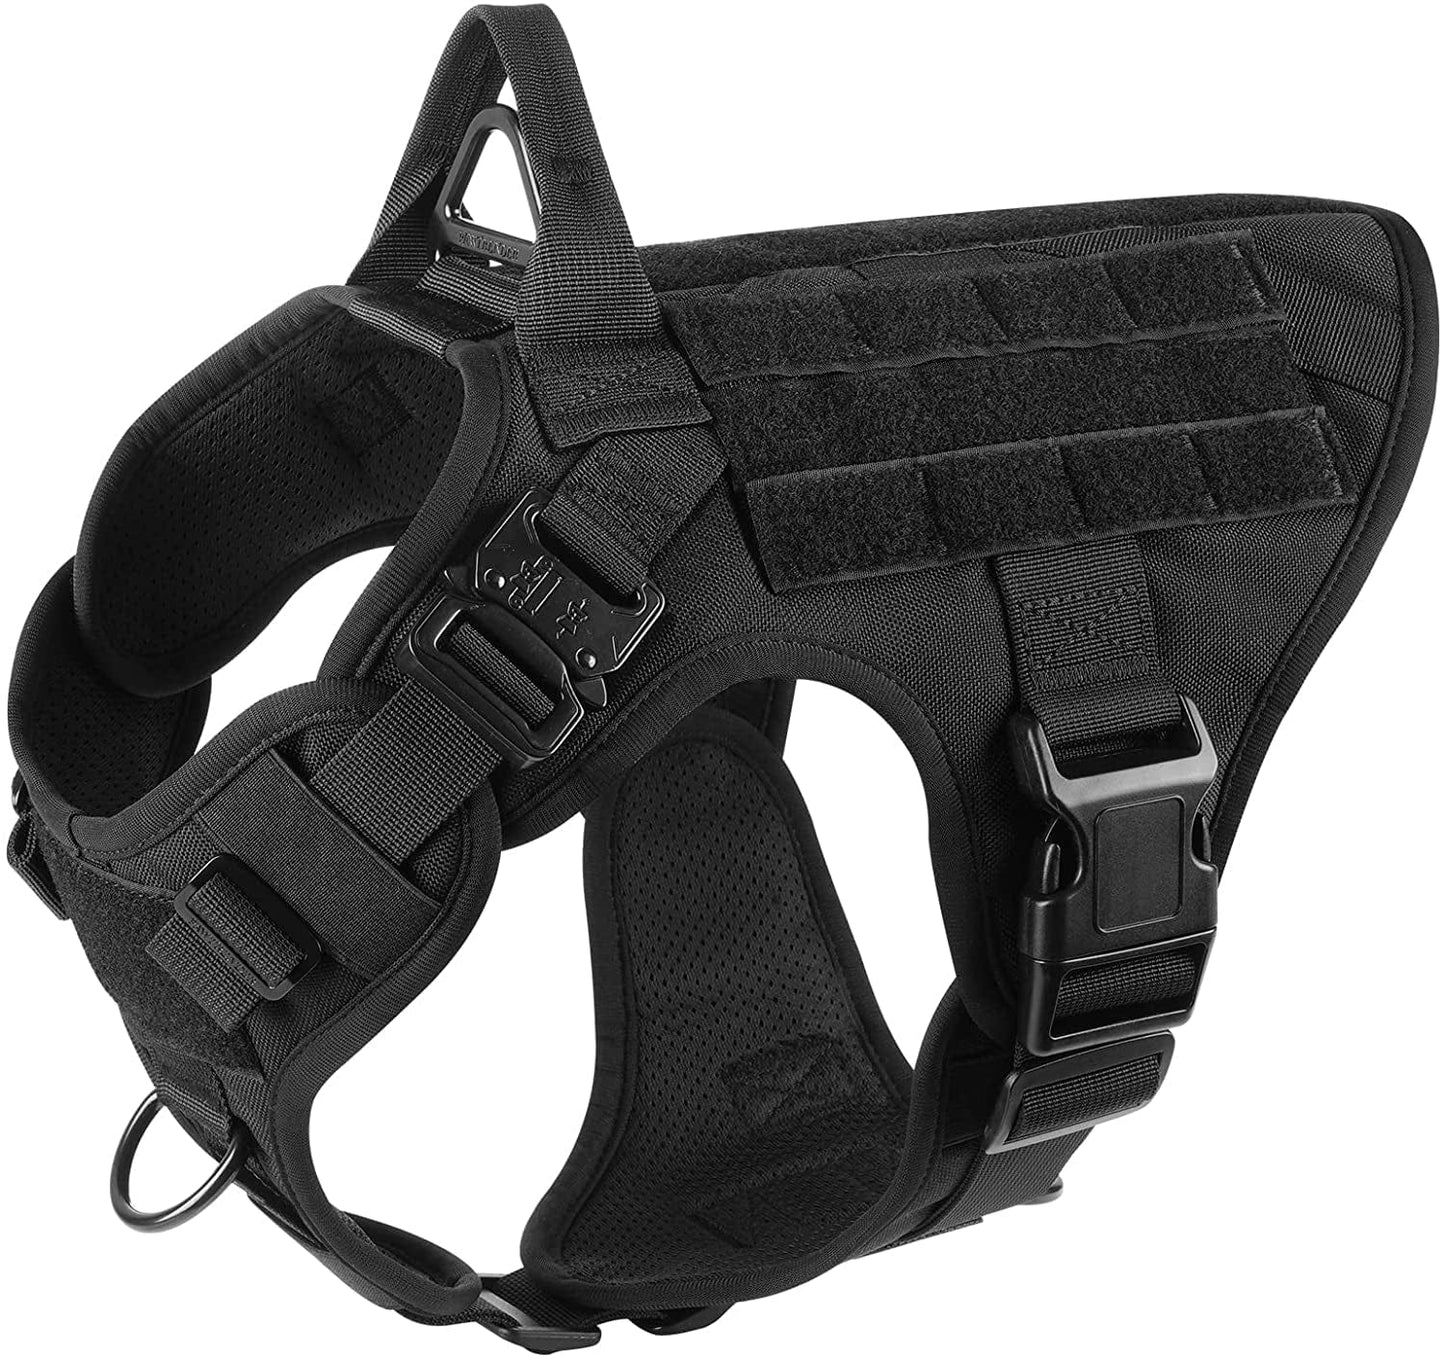 PAWTRENDER Tactical Dog Harness for Large Dogs No Pull, Adjustable Service Dog Vest Harness with Handle, Heavy Duty Big Dog Harness for Walking Running Training Working Hiking, Black, L Animals & Pet Supplies > Pet Supplies > Dog Supplies > Dog Apparel PAWTRENDER Black Medium 